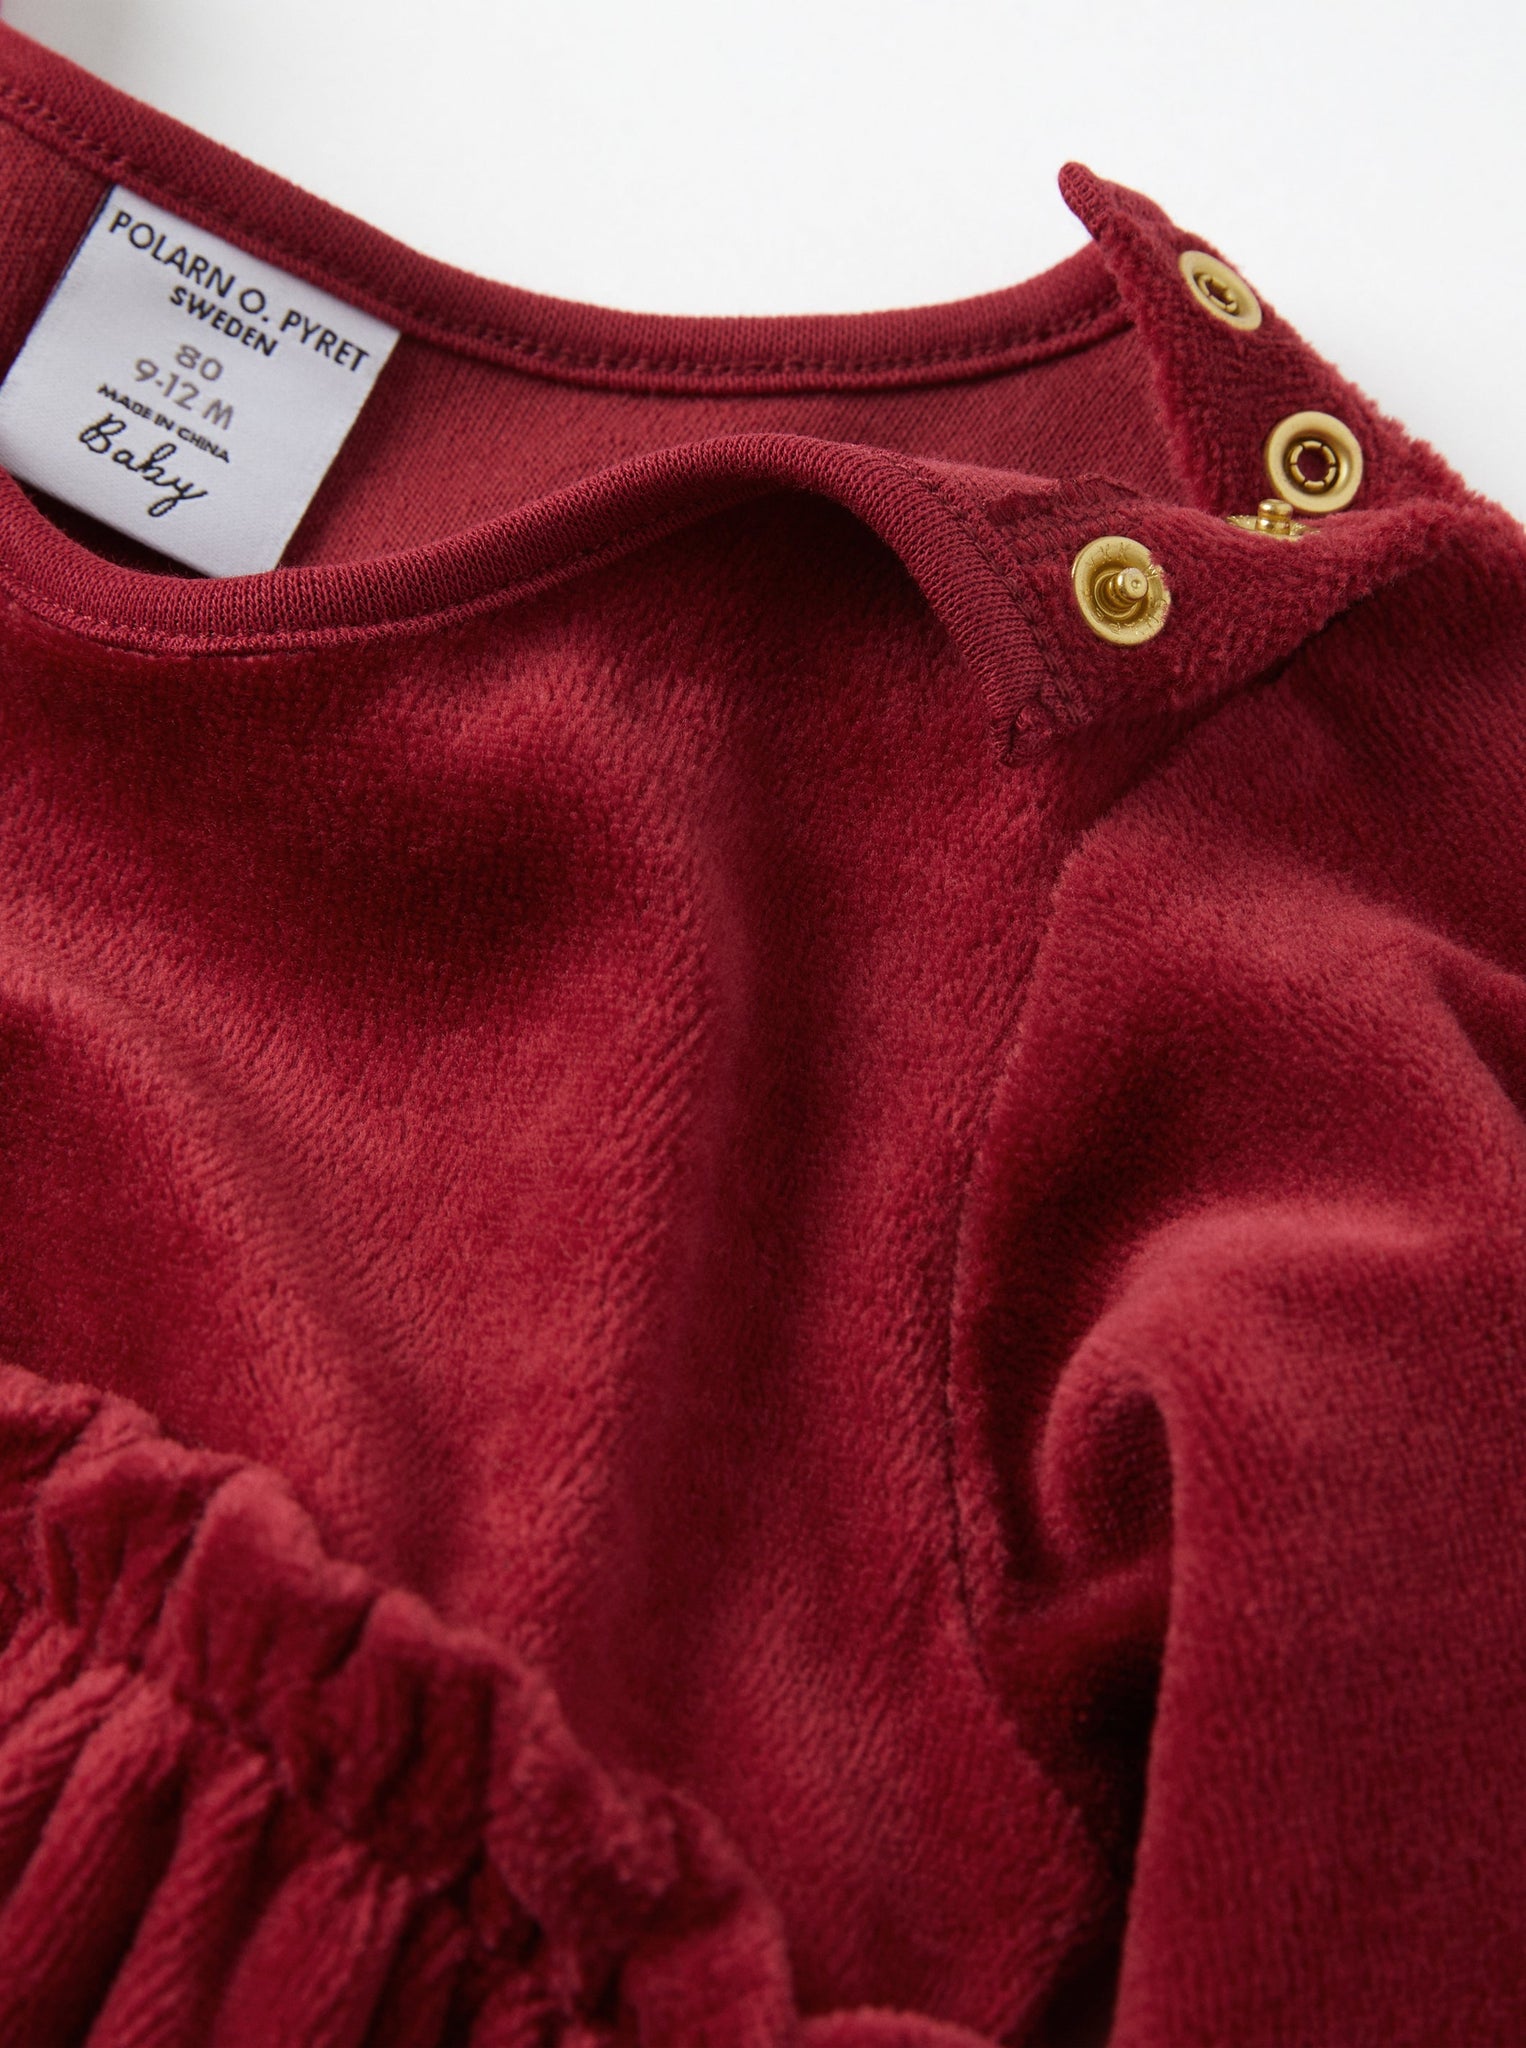 Red Organic Cotton Velour Baby Dress from the Polarn O. Pyret baby collection. The best ethical baby clothes